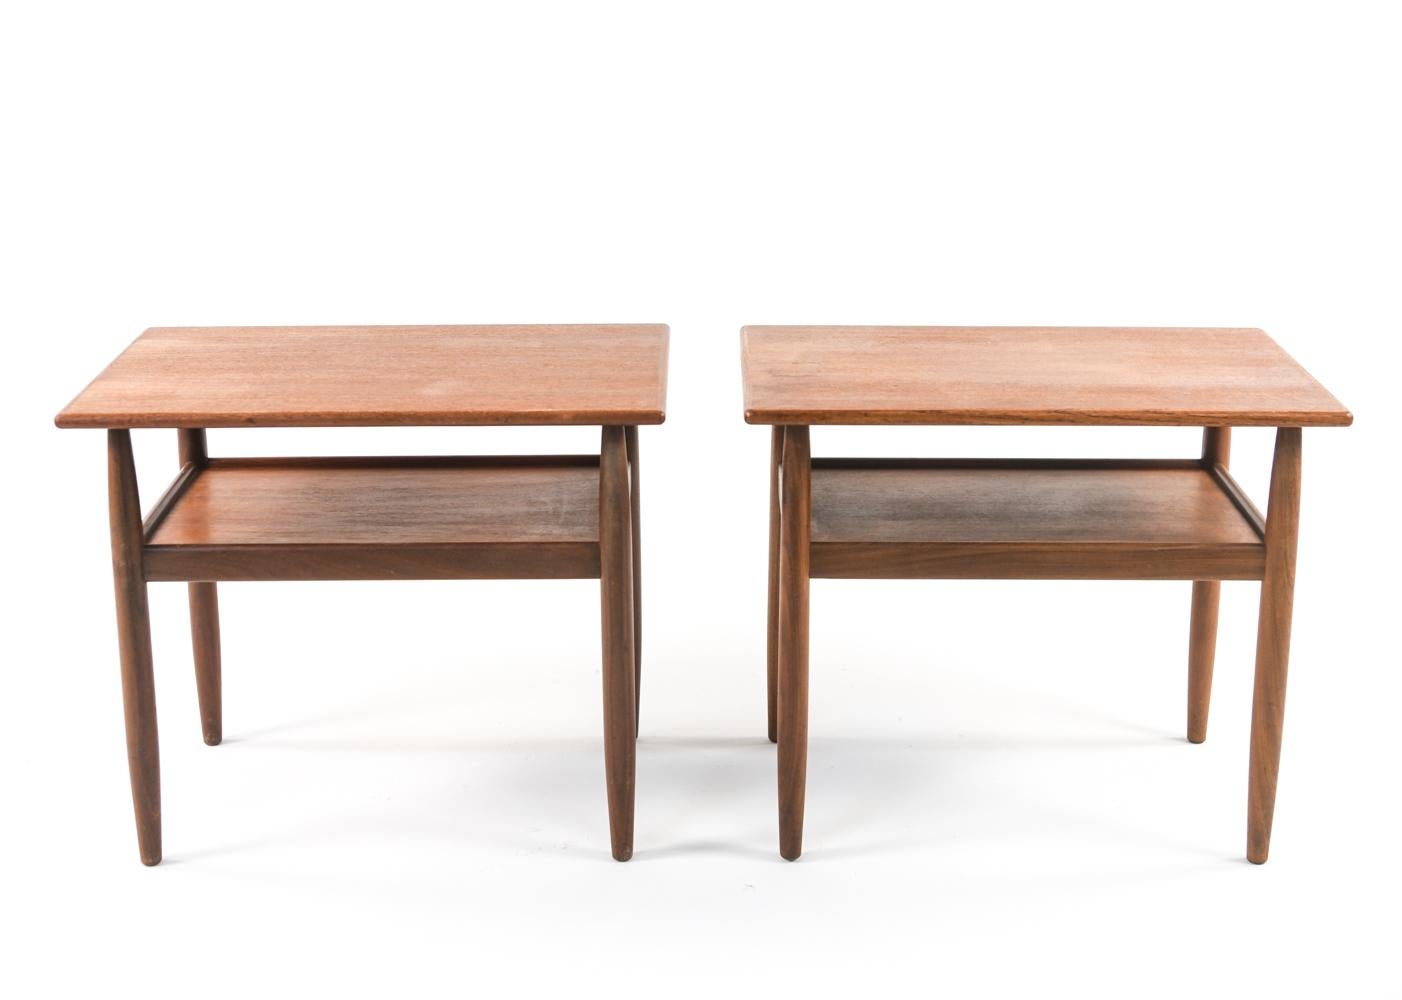 A pair of charming Danish mid-century two-tier side tables in teak wood designed by Ejvind A. Johansson for Vitre, c. 1960's. Retaining Vitre label underneath.